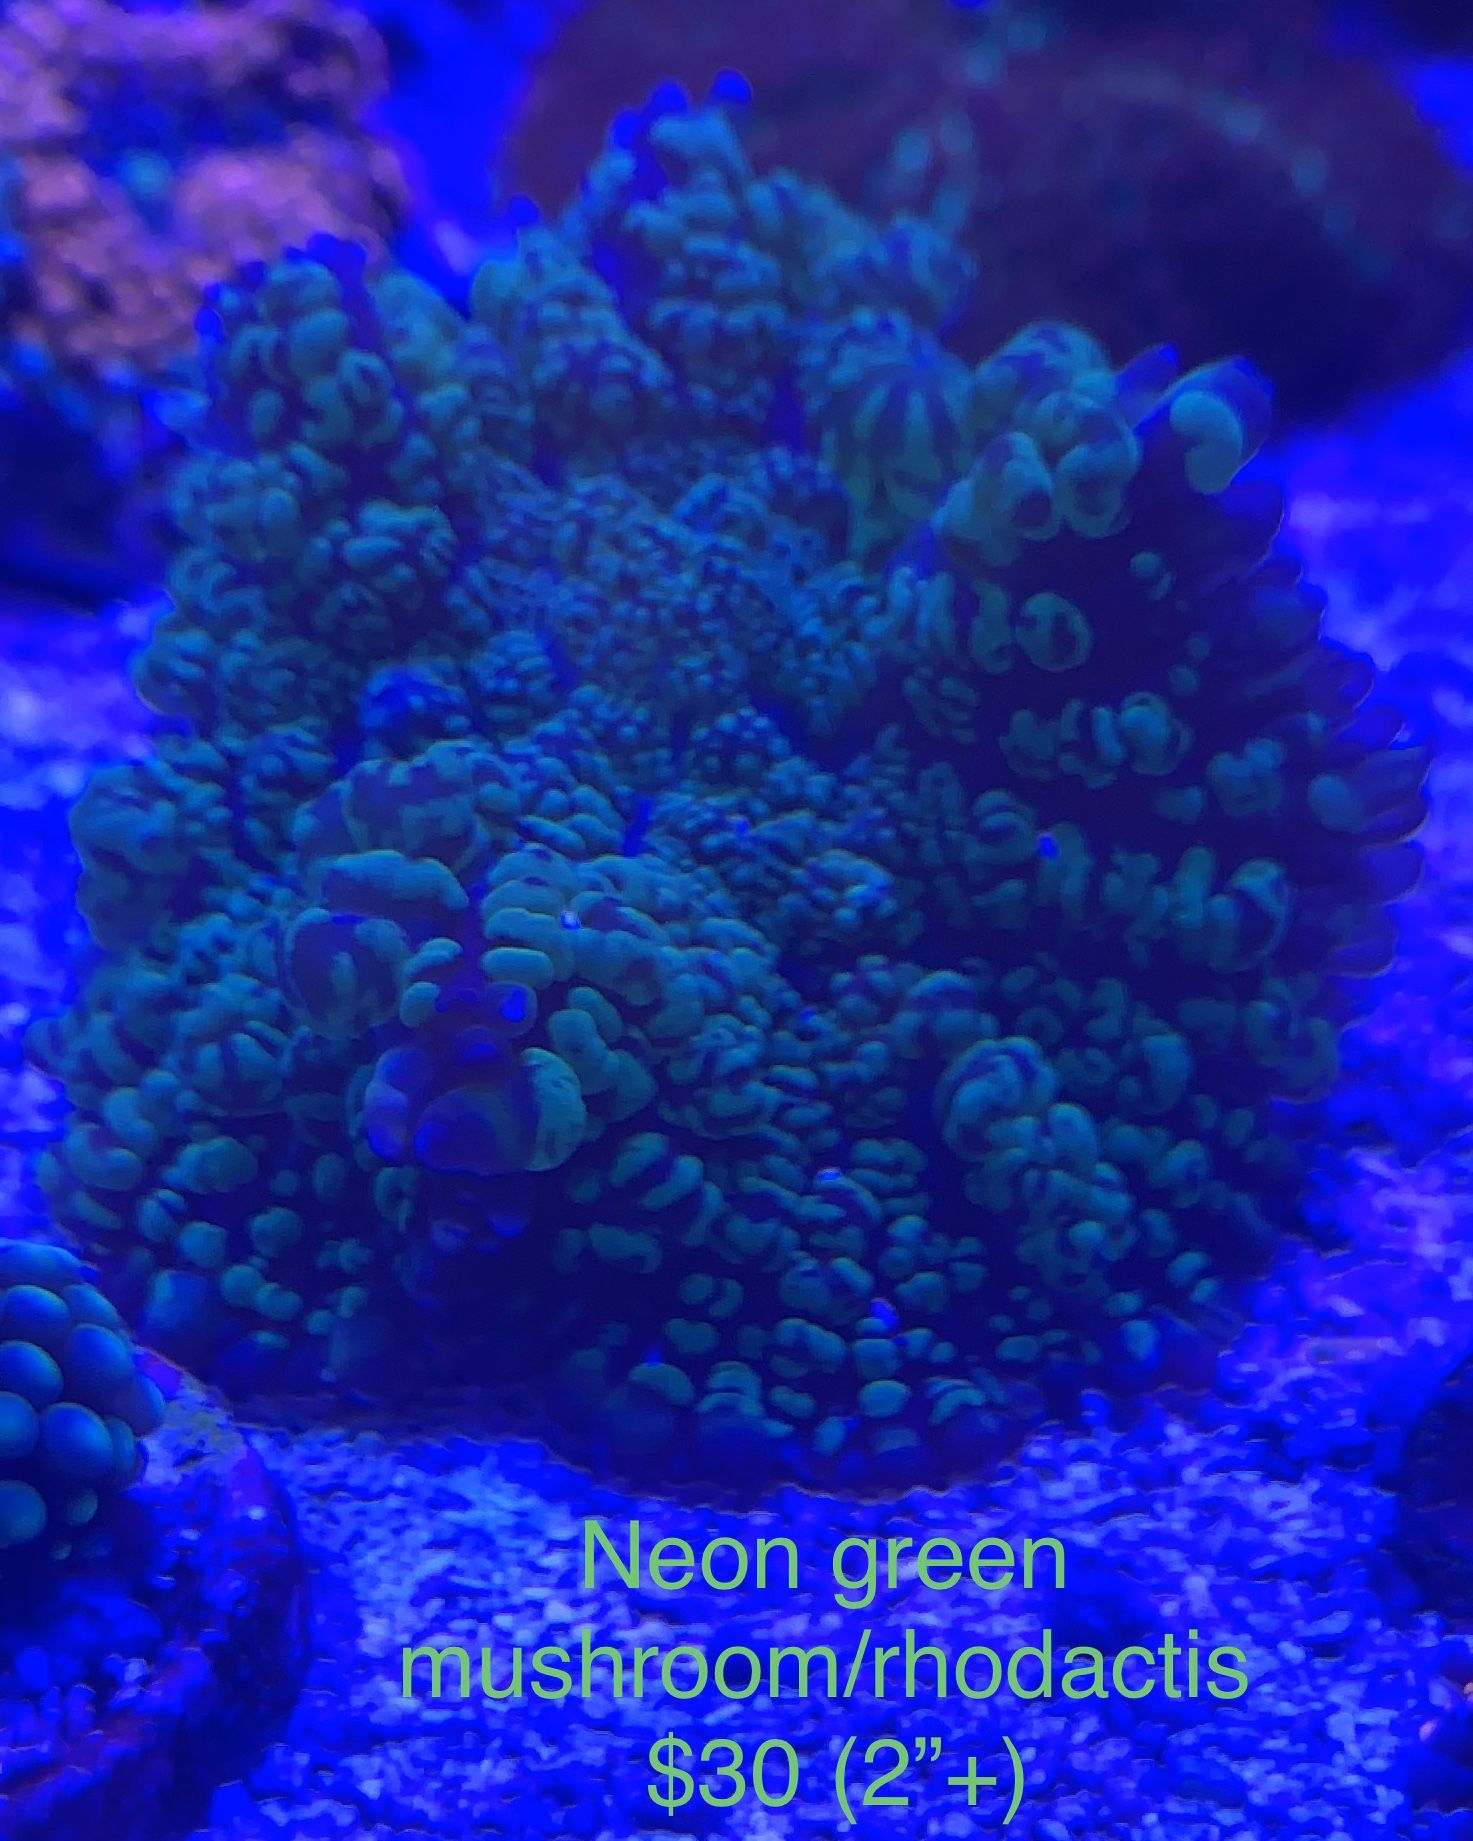 Coral Frags Prices On Pictures.